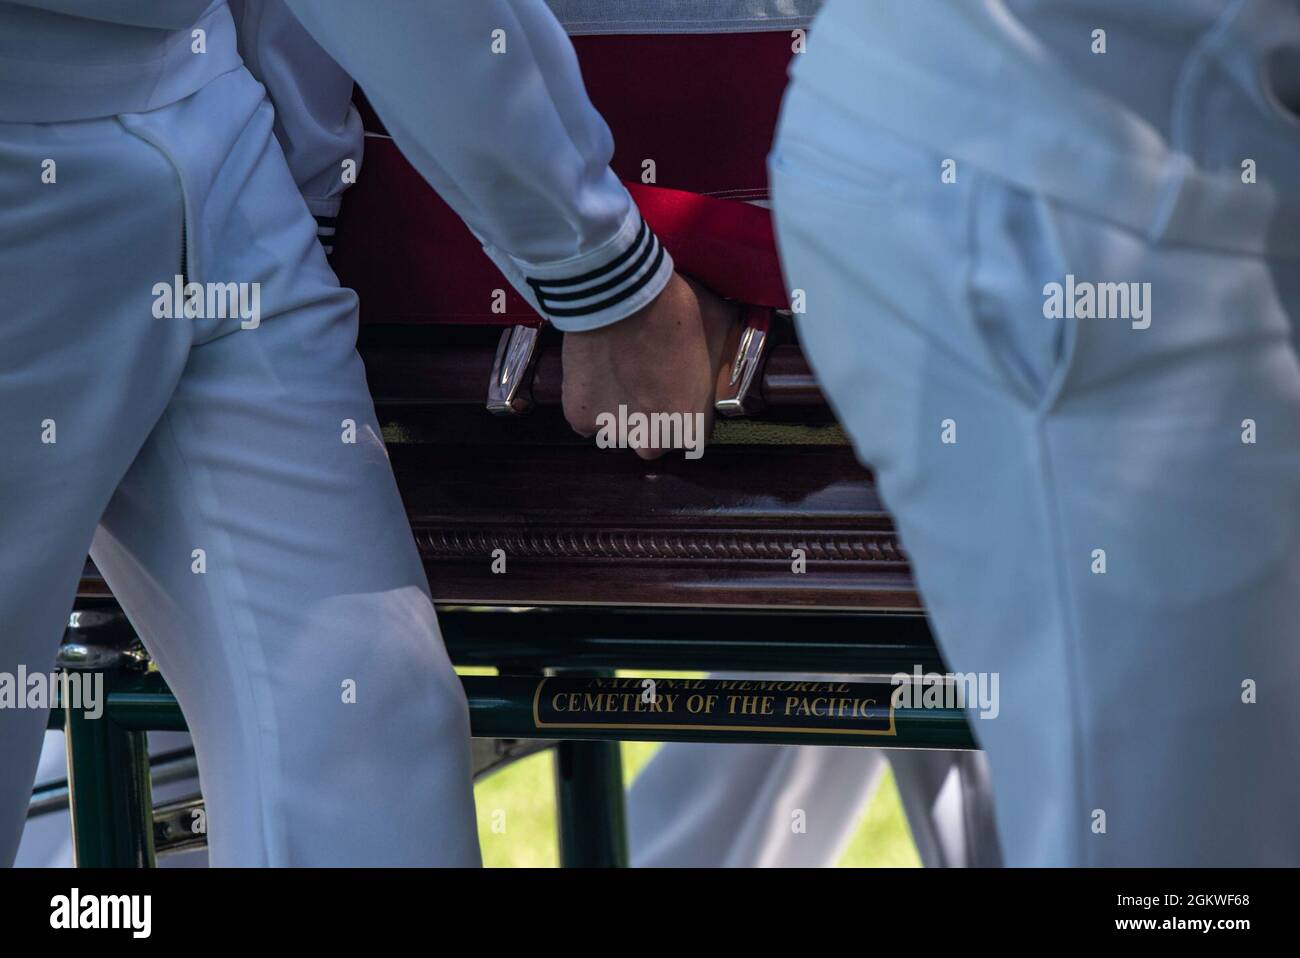 Sailors assigned to U.S. Navy Region Hawaii escort the casket of U.S. Navy Musician 2nd Class Charlton Hanna Ferguson, 19, of Kosciusko, Missouri during a funeral held at the National Memorial Cemetery of the Pacific, Honolulu, Hawaii, July 9, 2021. Ferguson was assigned to the USS Oklahoma when it sustained fire from Japanese aircraft and multiple torpedo hits. The result of the attack capsized the battleship causing the deaths of 429 crew members on Dec. 7, 1941, at Ford Island, Pearl Harbor. Ferguson was identified Dec. 17, 2020 through DNA analysis by the Defense POW/MIA Accounting Agency Stock Photo